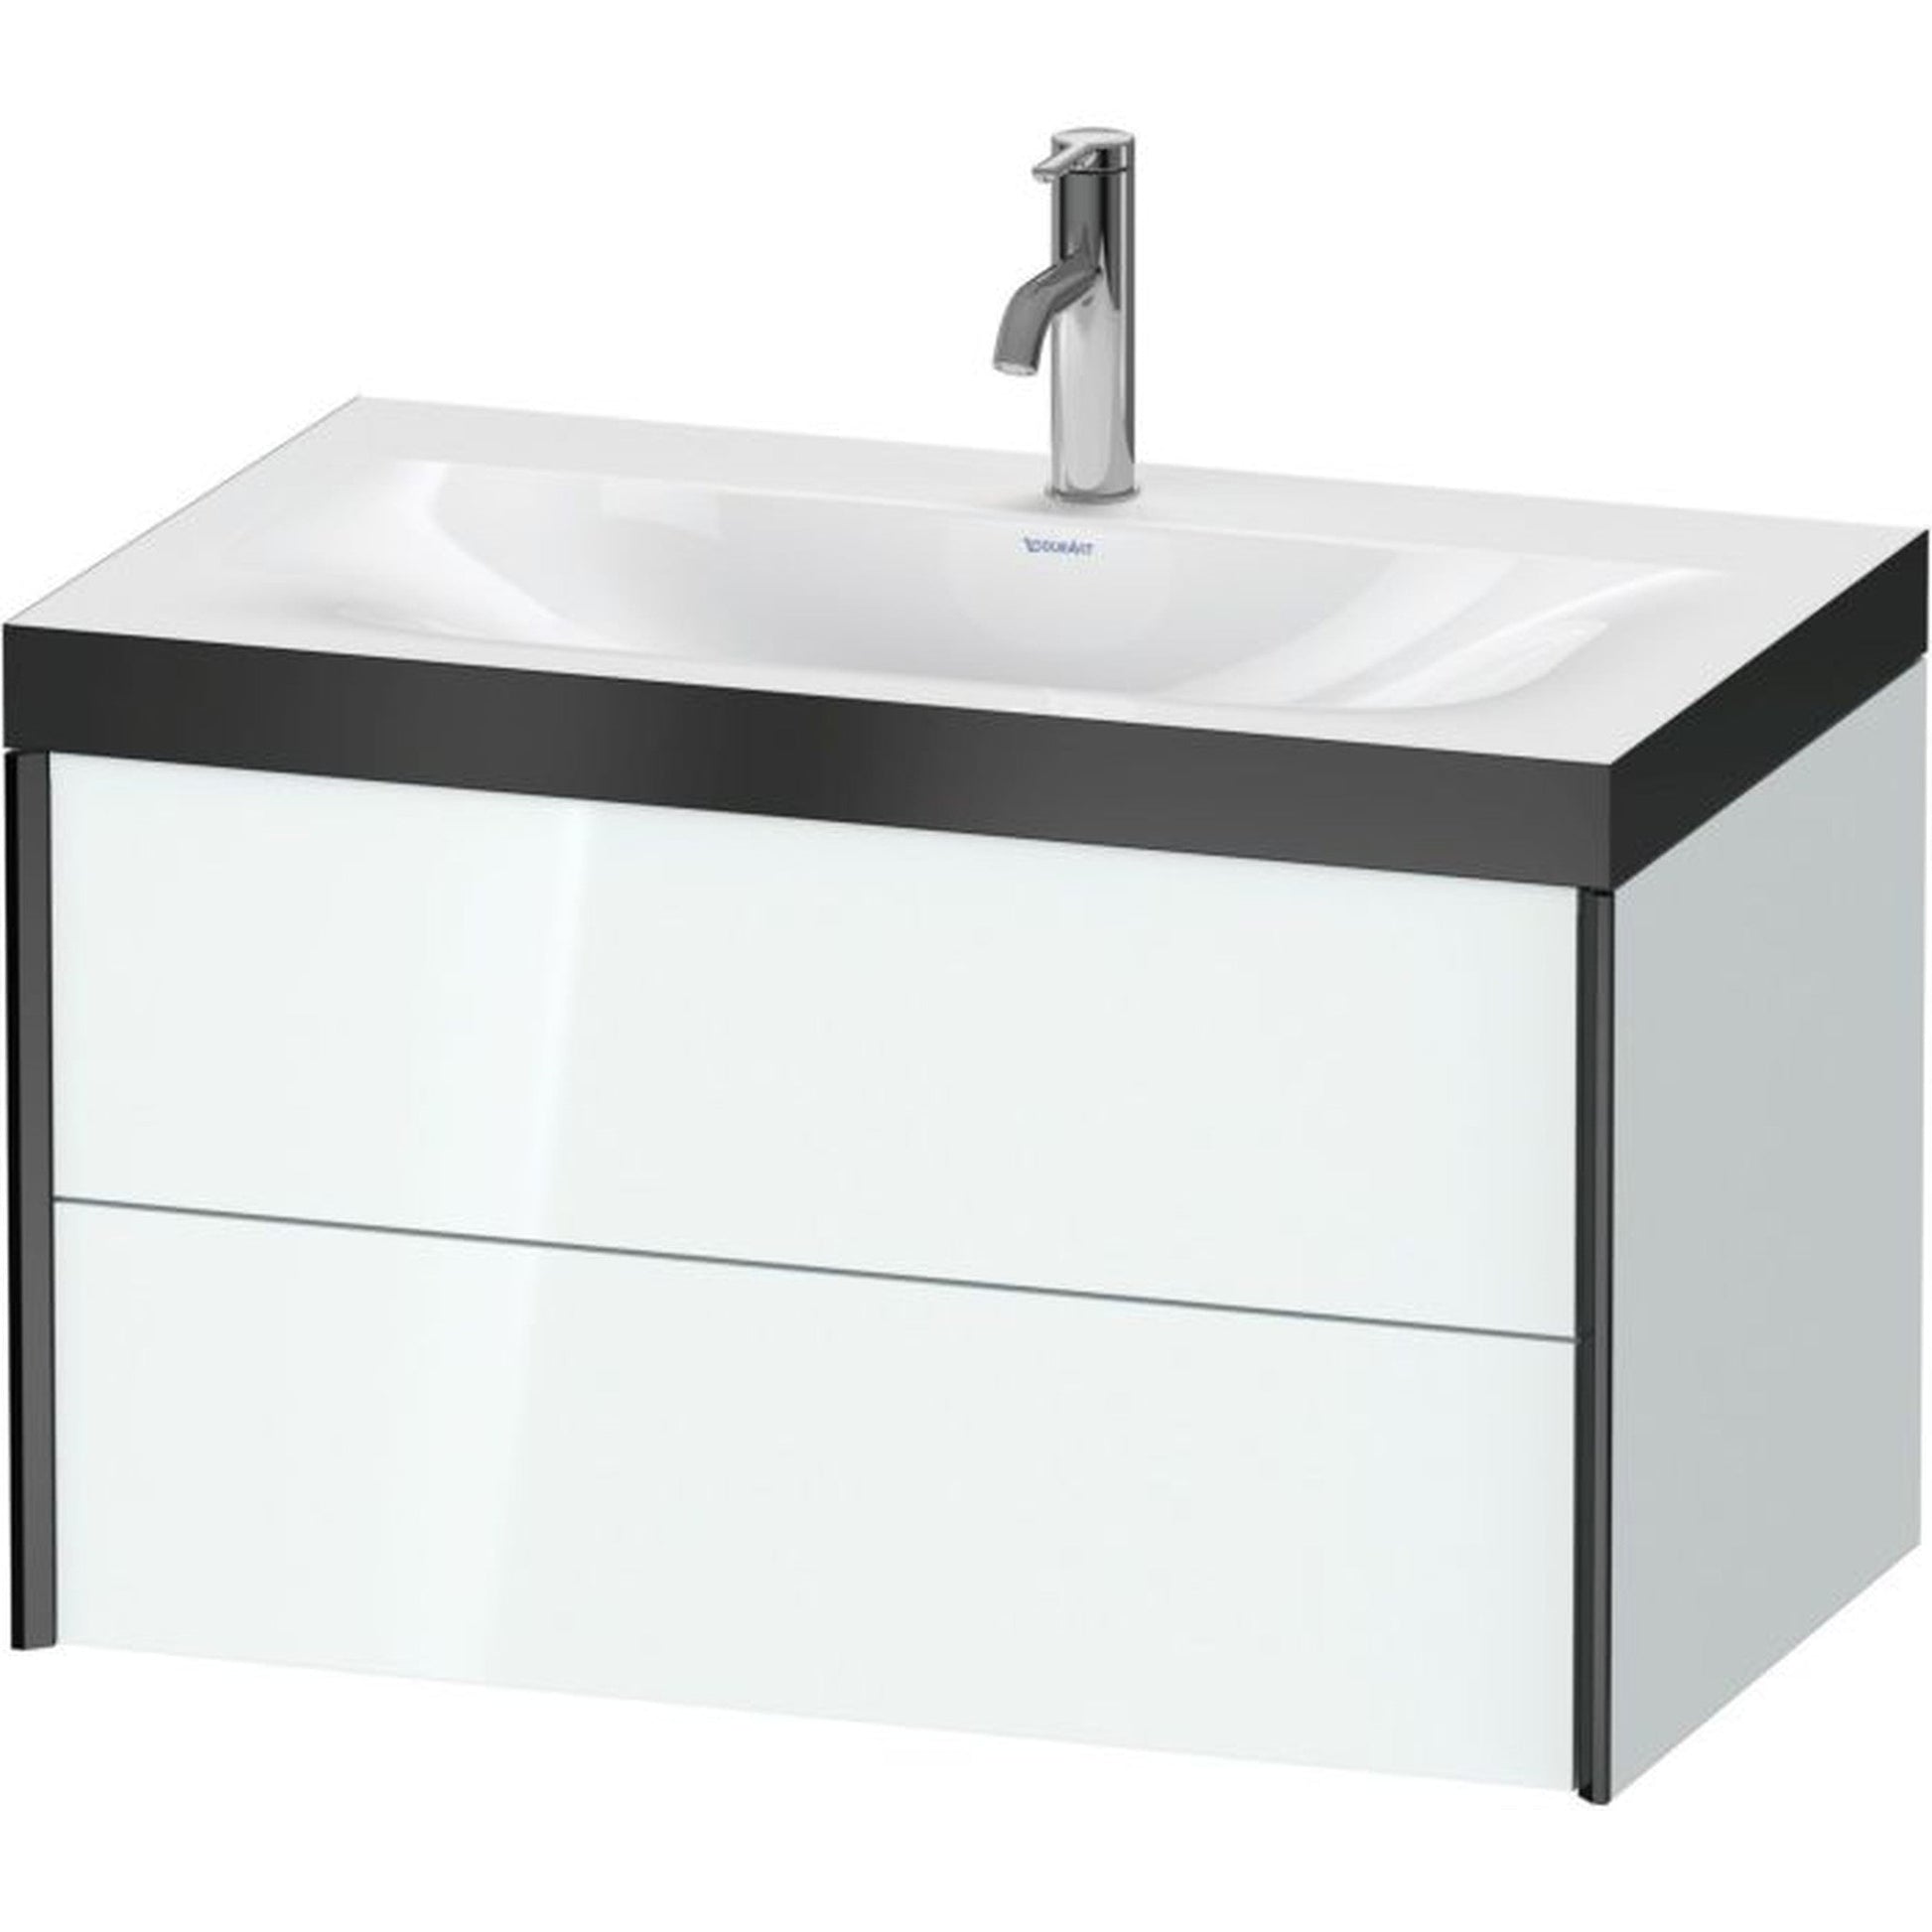 Duravit Xviu 31" x 20" x 19" Two Drawer C-Bonded Wall-Mount Vanity Kit With One Tap Hole, White (XV4615OB285P)